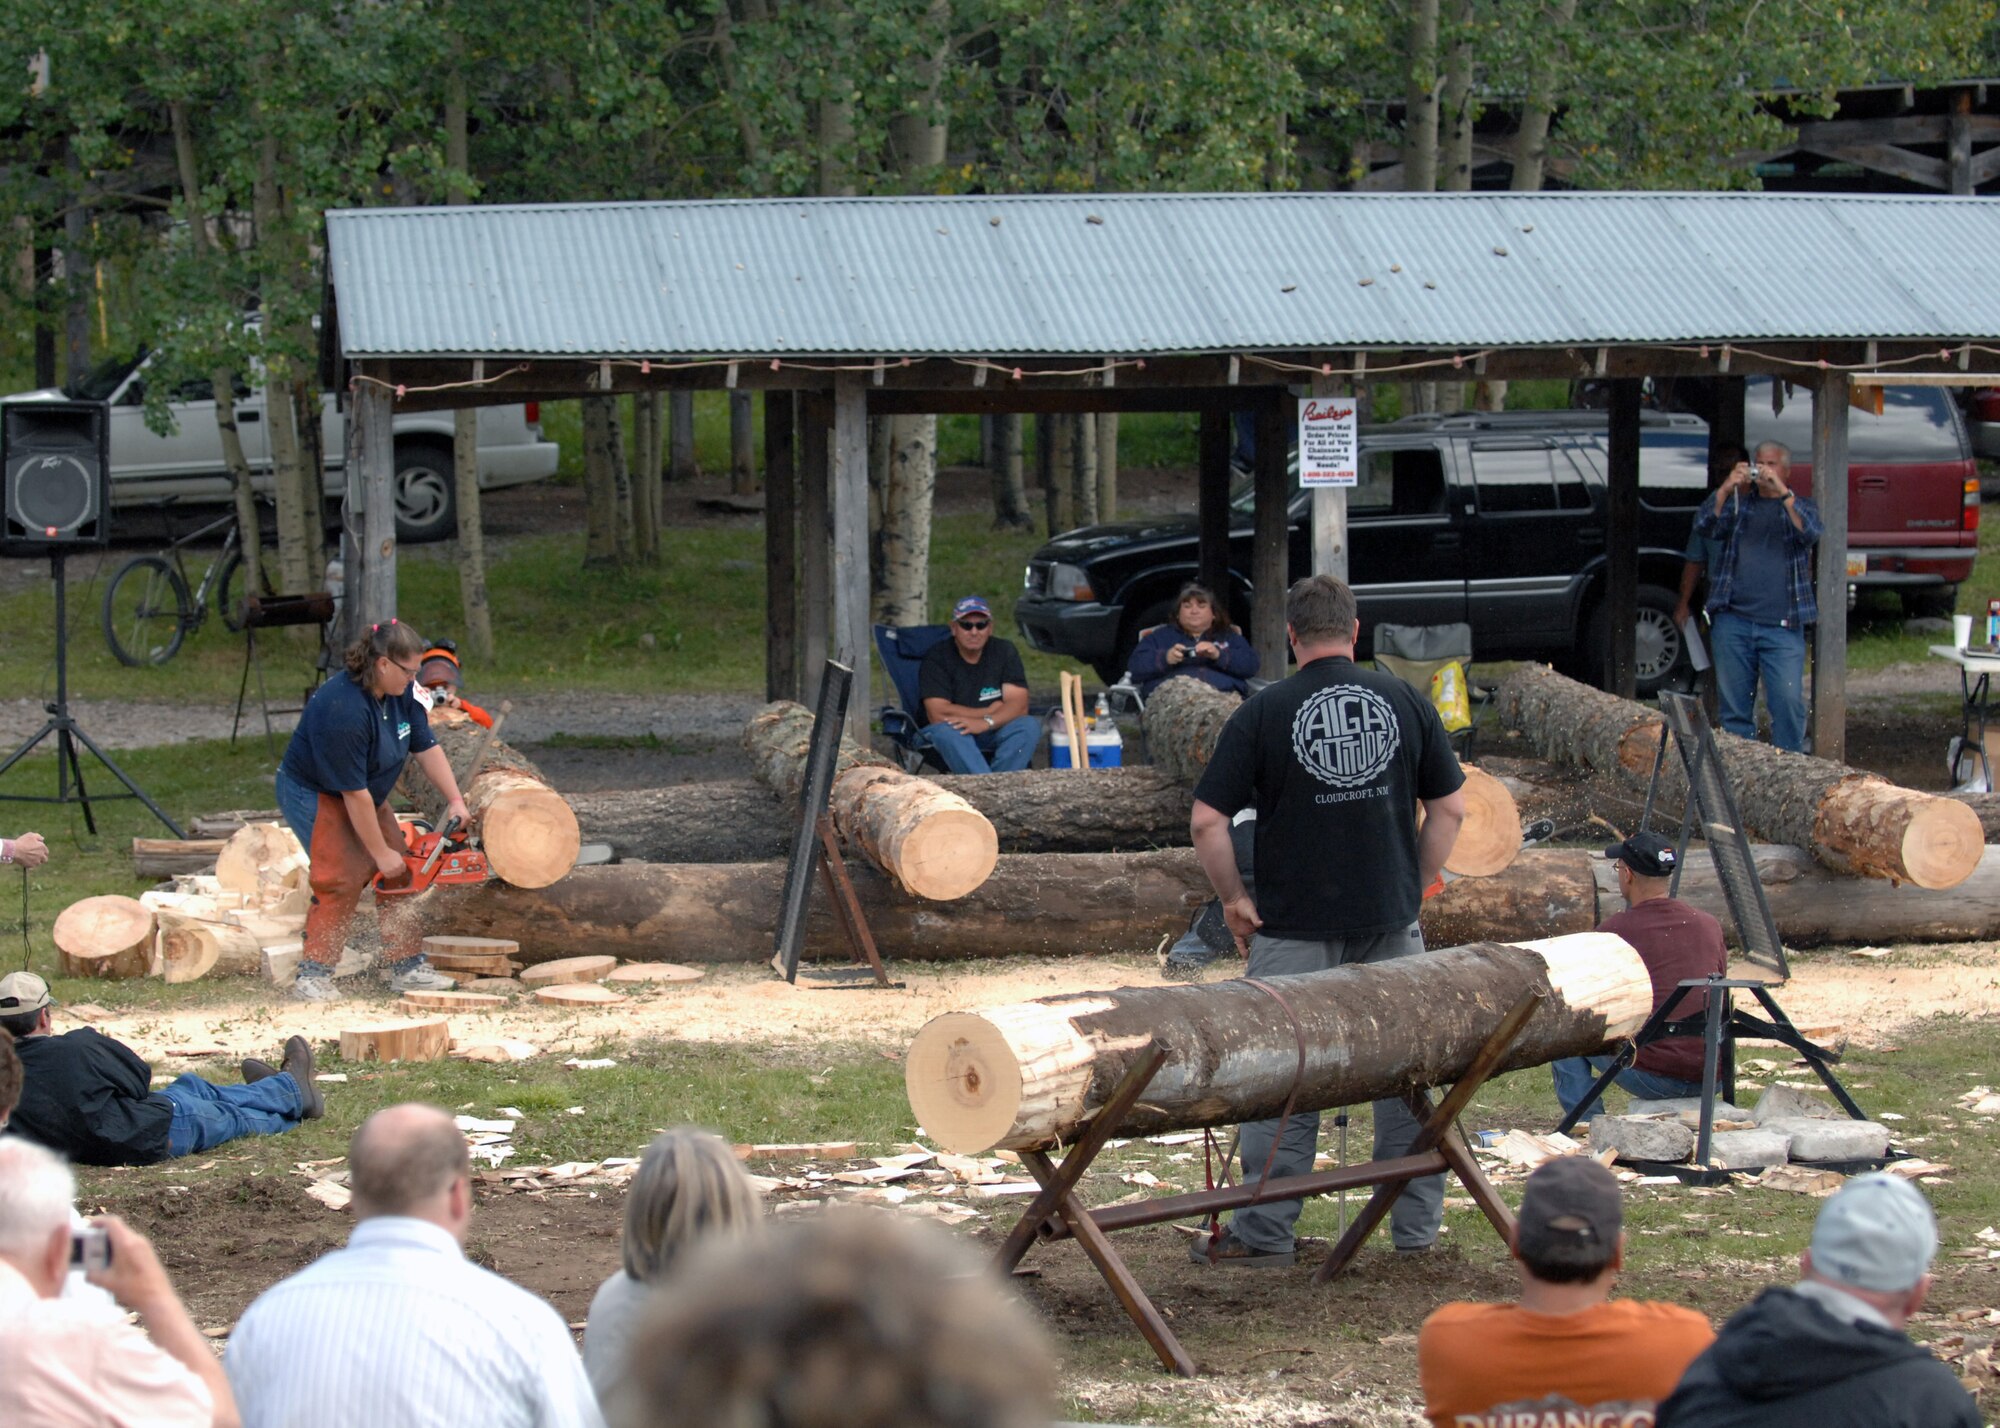 Dana Lenzo, competitor in Lumberjack Day, chops off pieces of pinewood at Zenith park in Cloudcroft, N.M., September 20. Judges and the audience watched as the lumberjack contestants competed in more than 18 events against one another to win first prize. (U.S. Air Force photo/Airman 1st. Class Veronica Salgado)